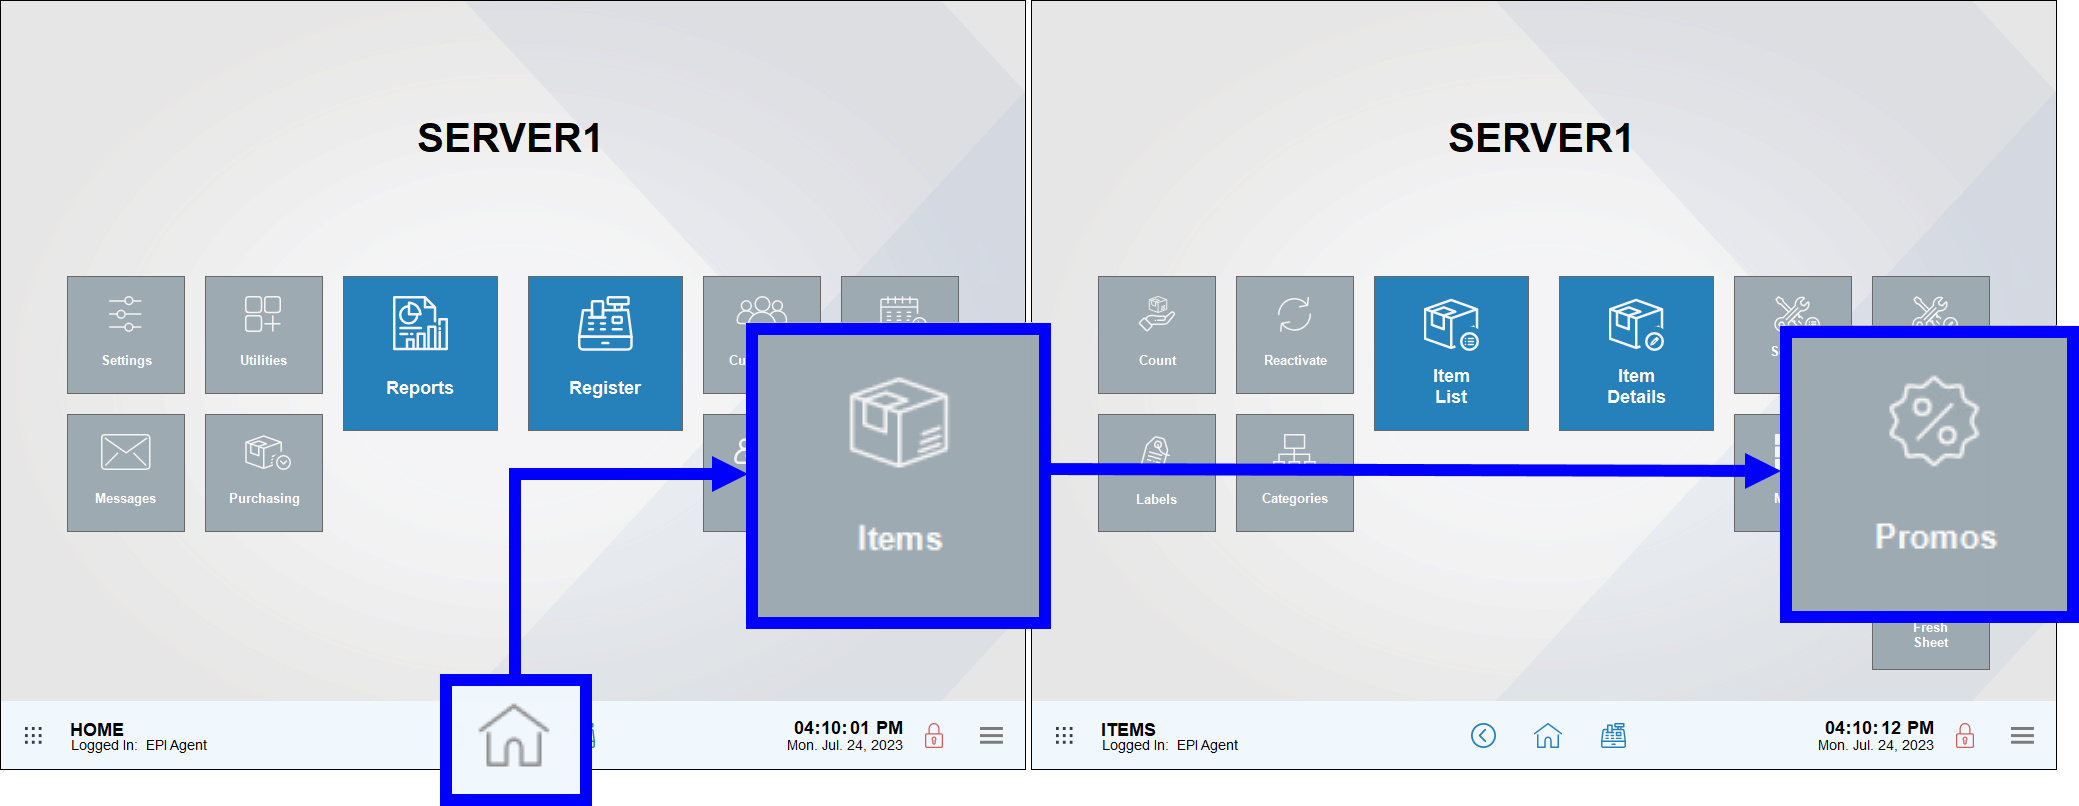 Home icon highlighted with arrows connecting to items module and promos submodule